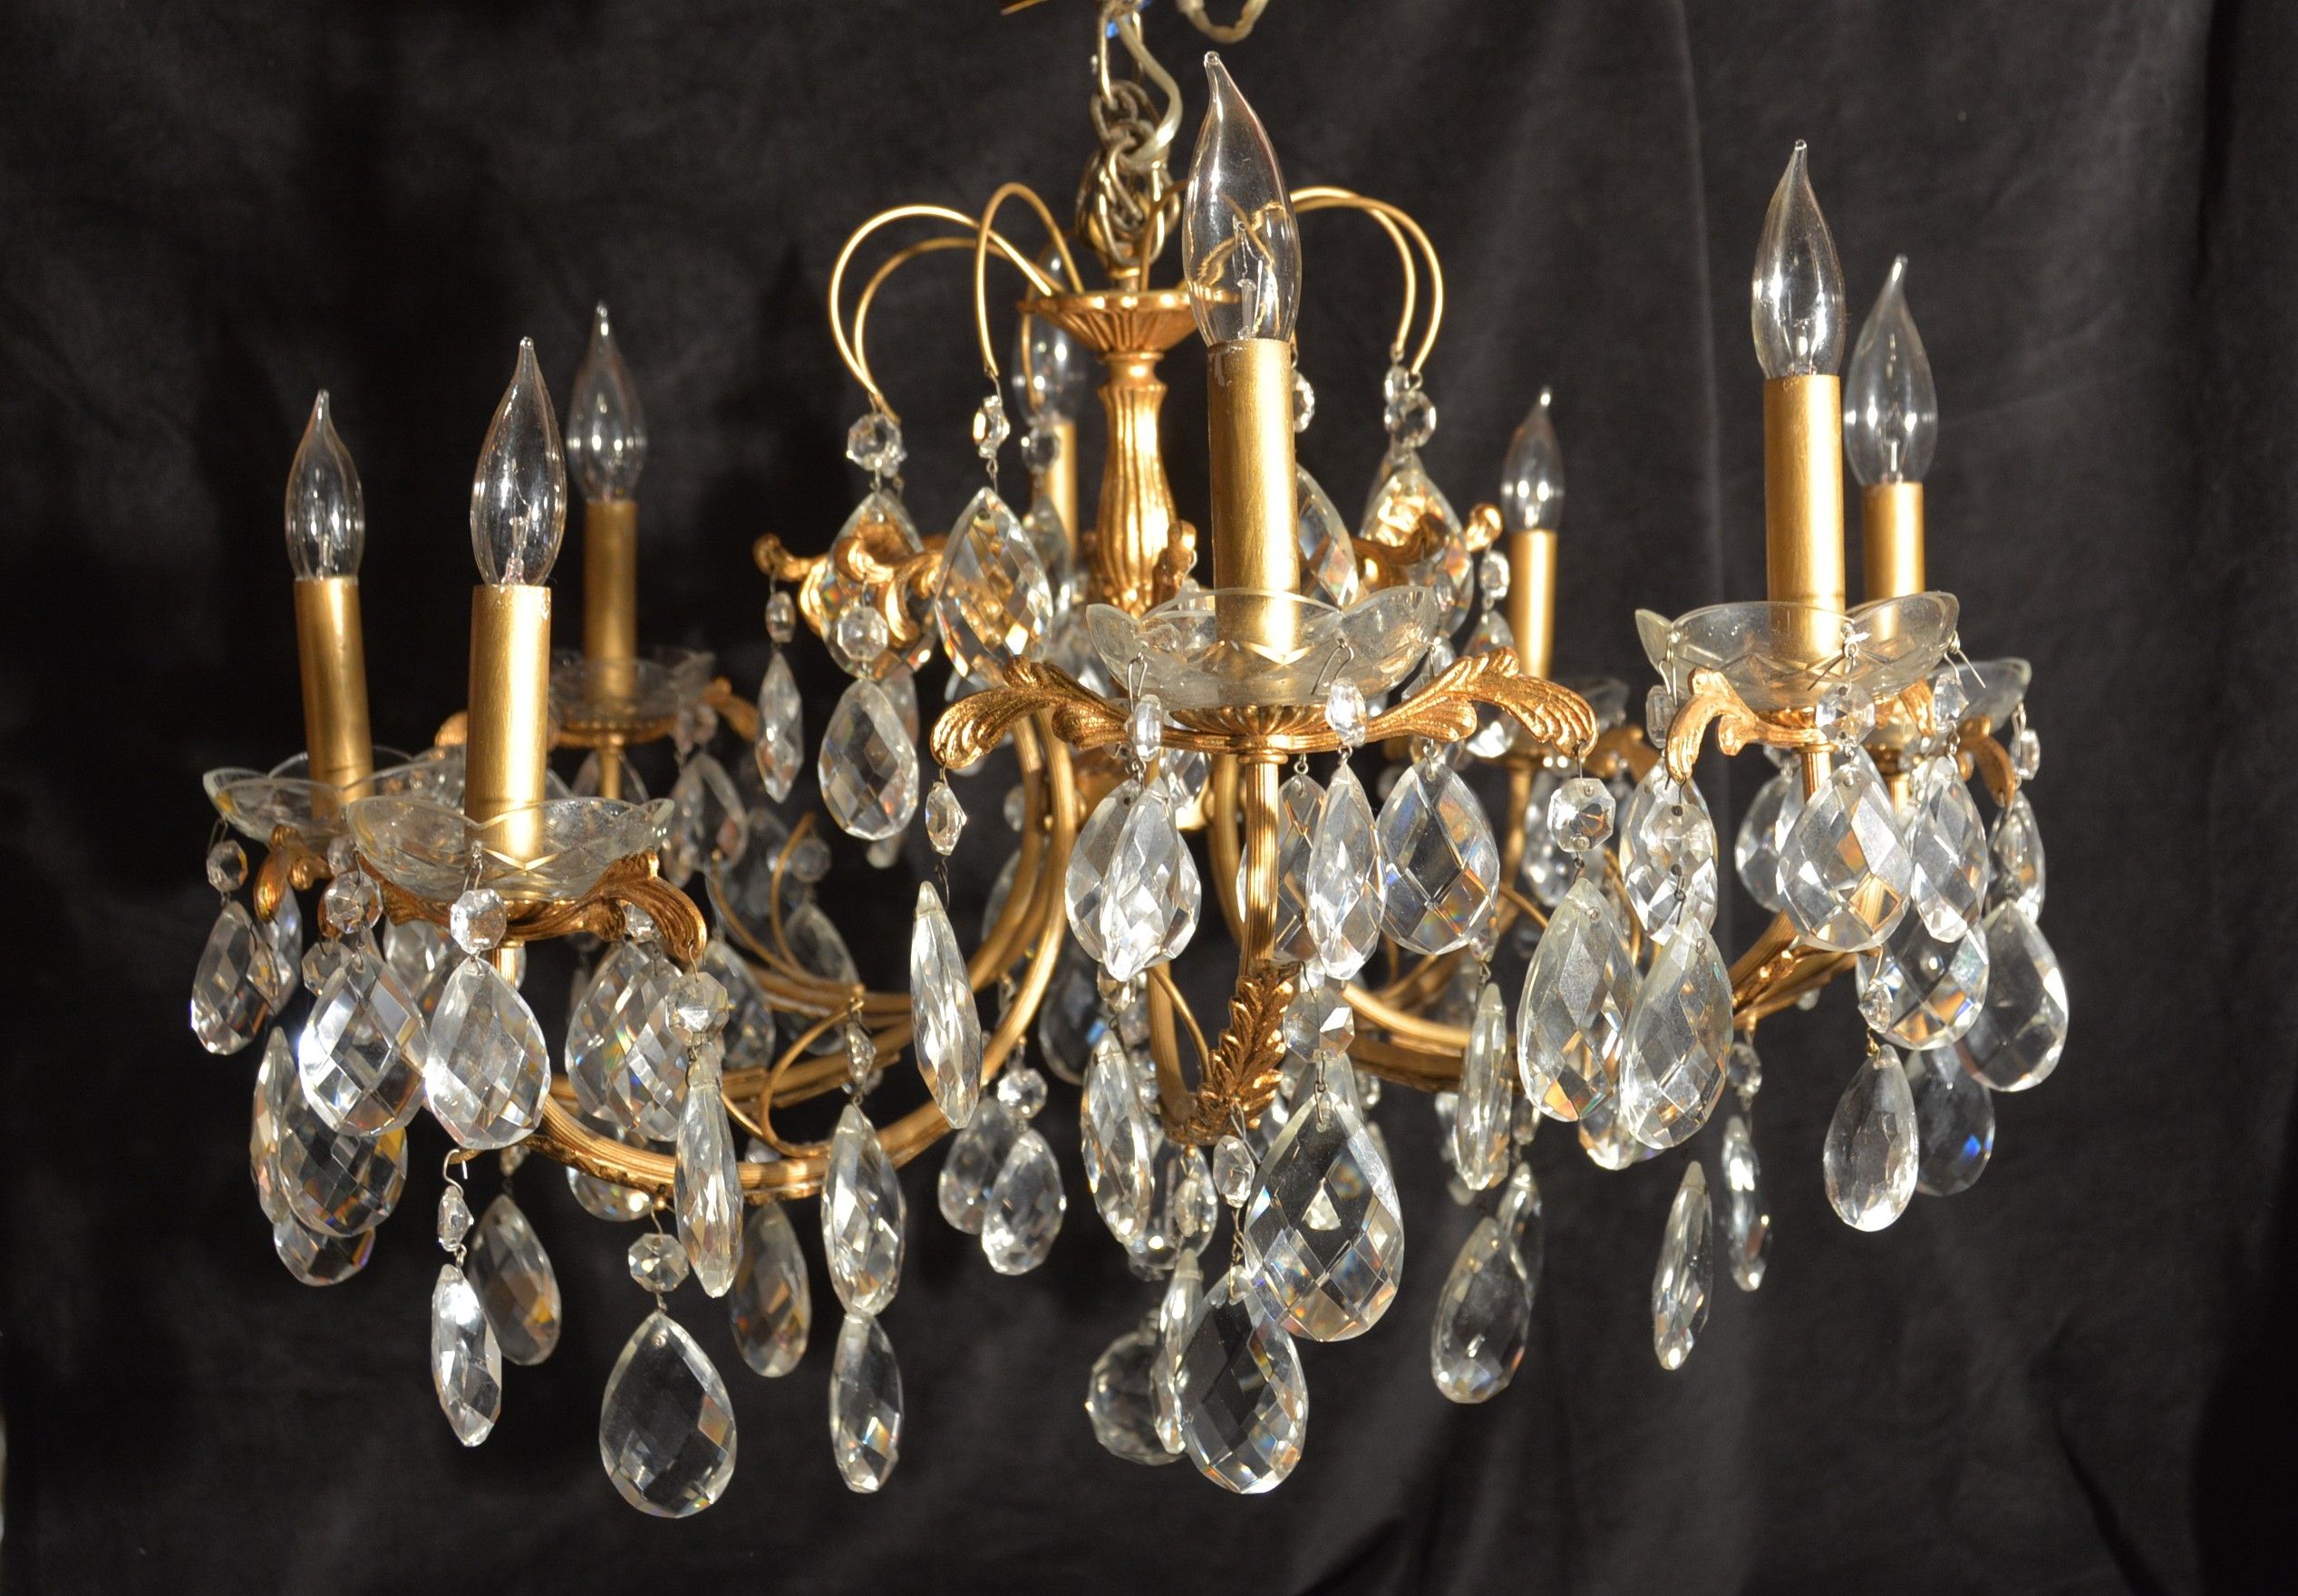 8 Light French Gold Bronze Crystal Chandelier For Sale Inside Antique Brass Crystal Chandeliers (View 9 of 15)